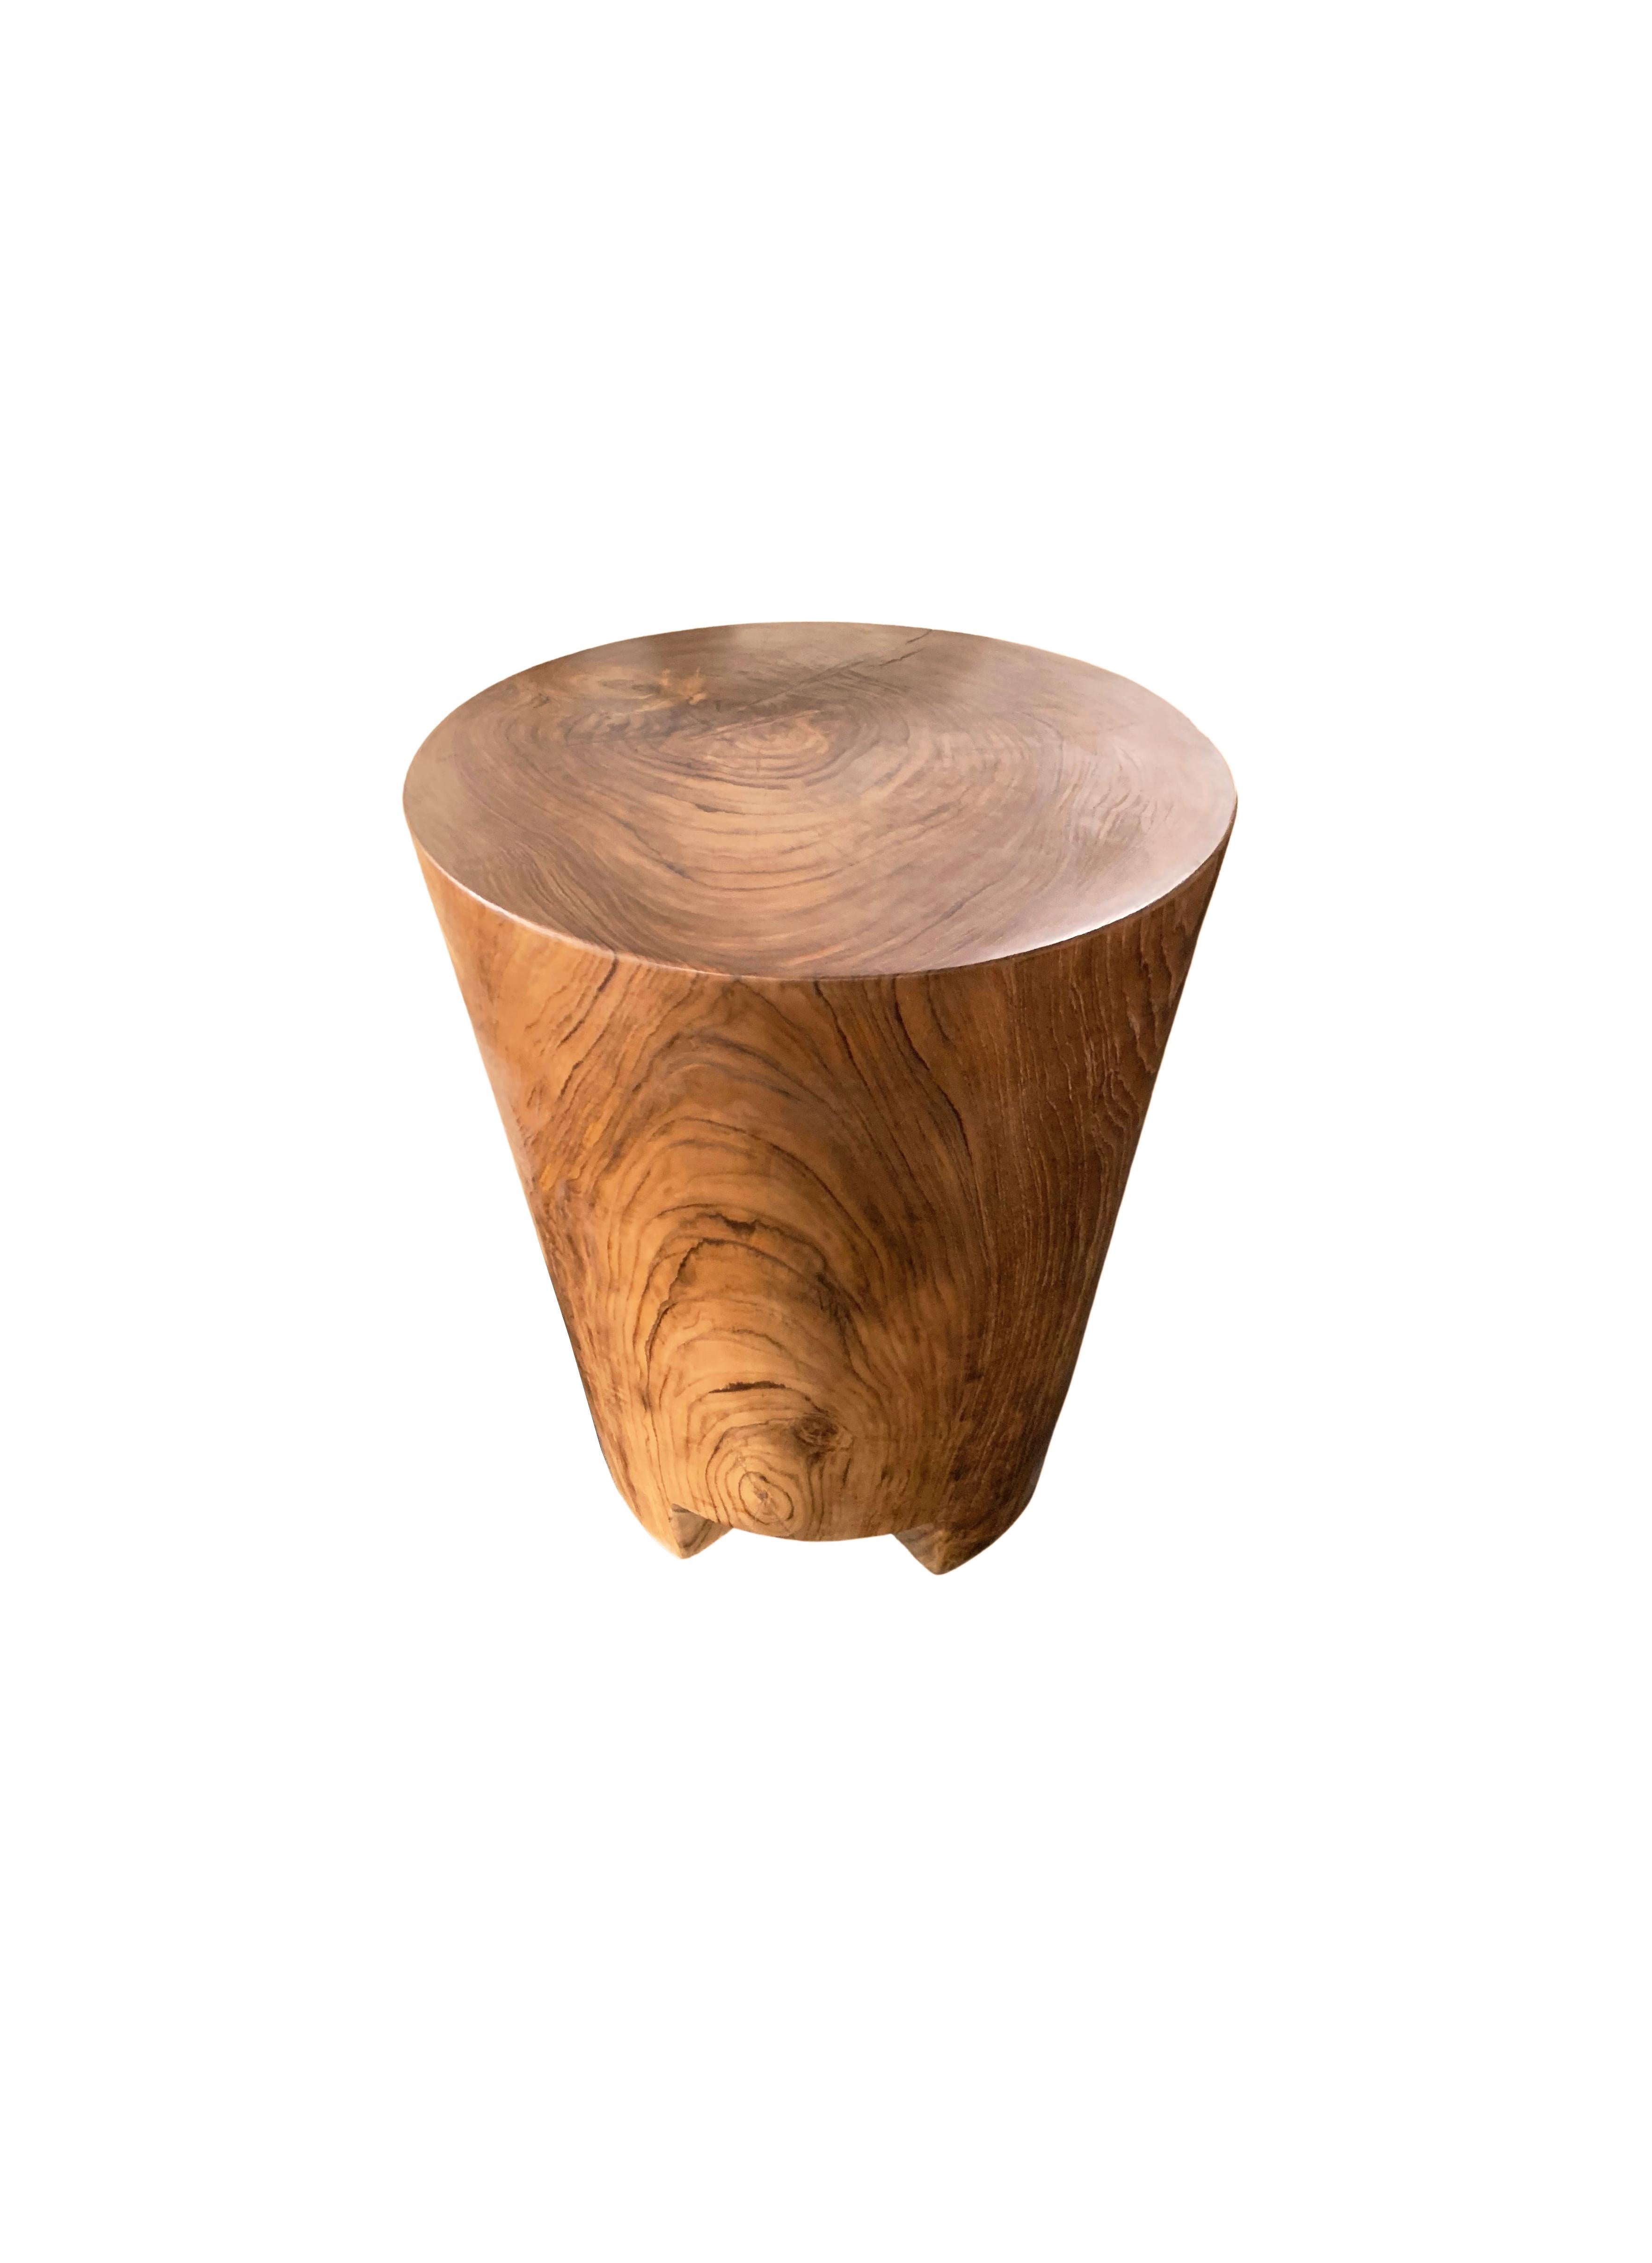 A wonderfully sculptural round side table. Its neutral pigments make it perfect for any space. A uniquely sculptural and versatile piece certain to invoke conversation. It was crafted from a solid block of mango wood and has a smooth texture finish.